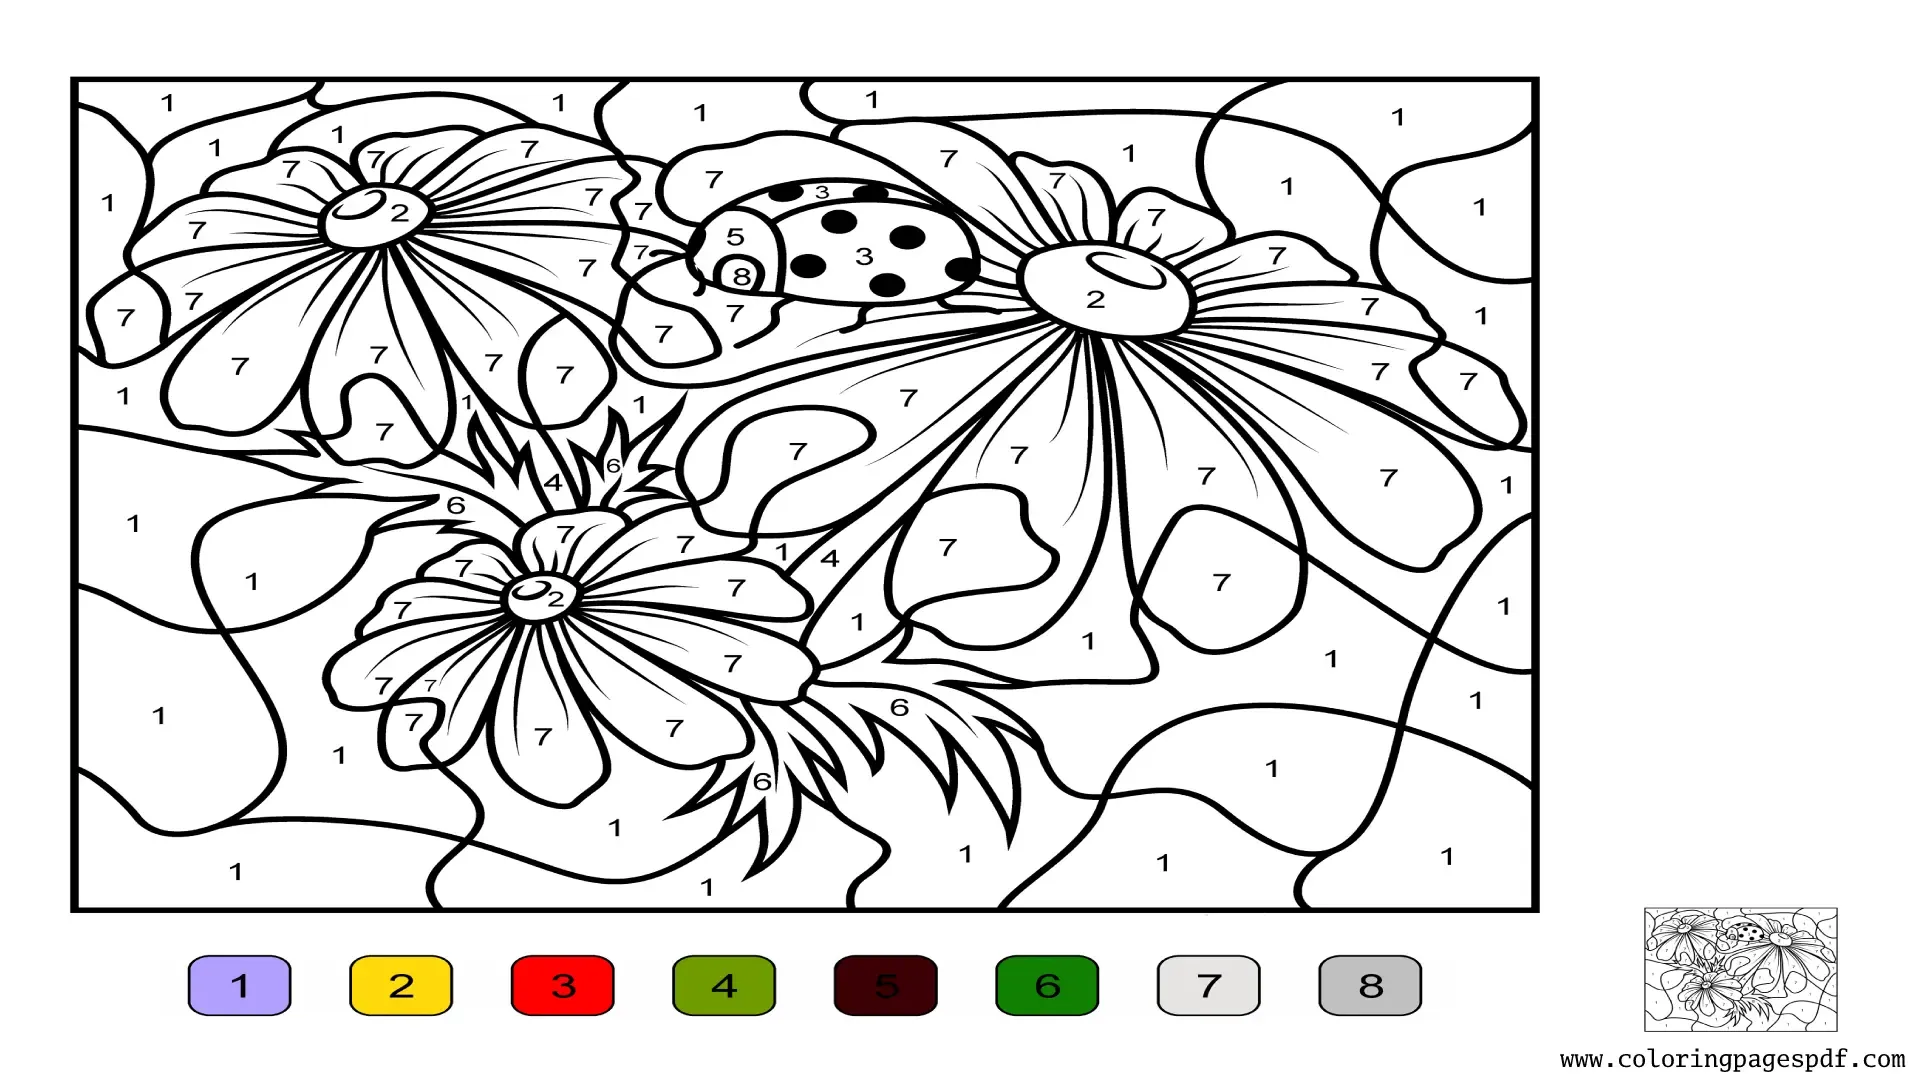 Coloring Pages Of  A Ladybug On Top Of Flowers